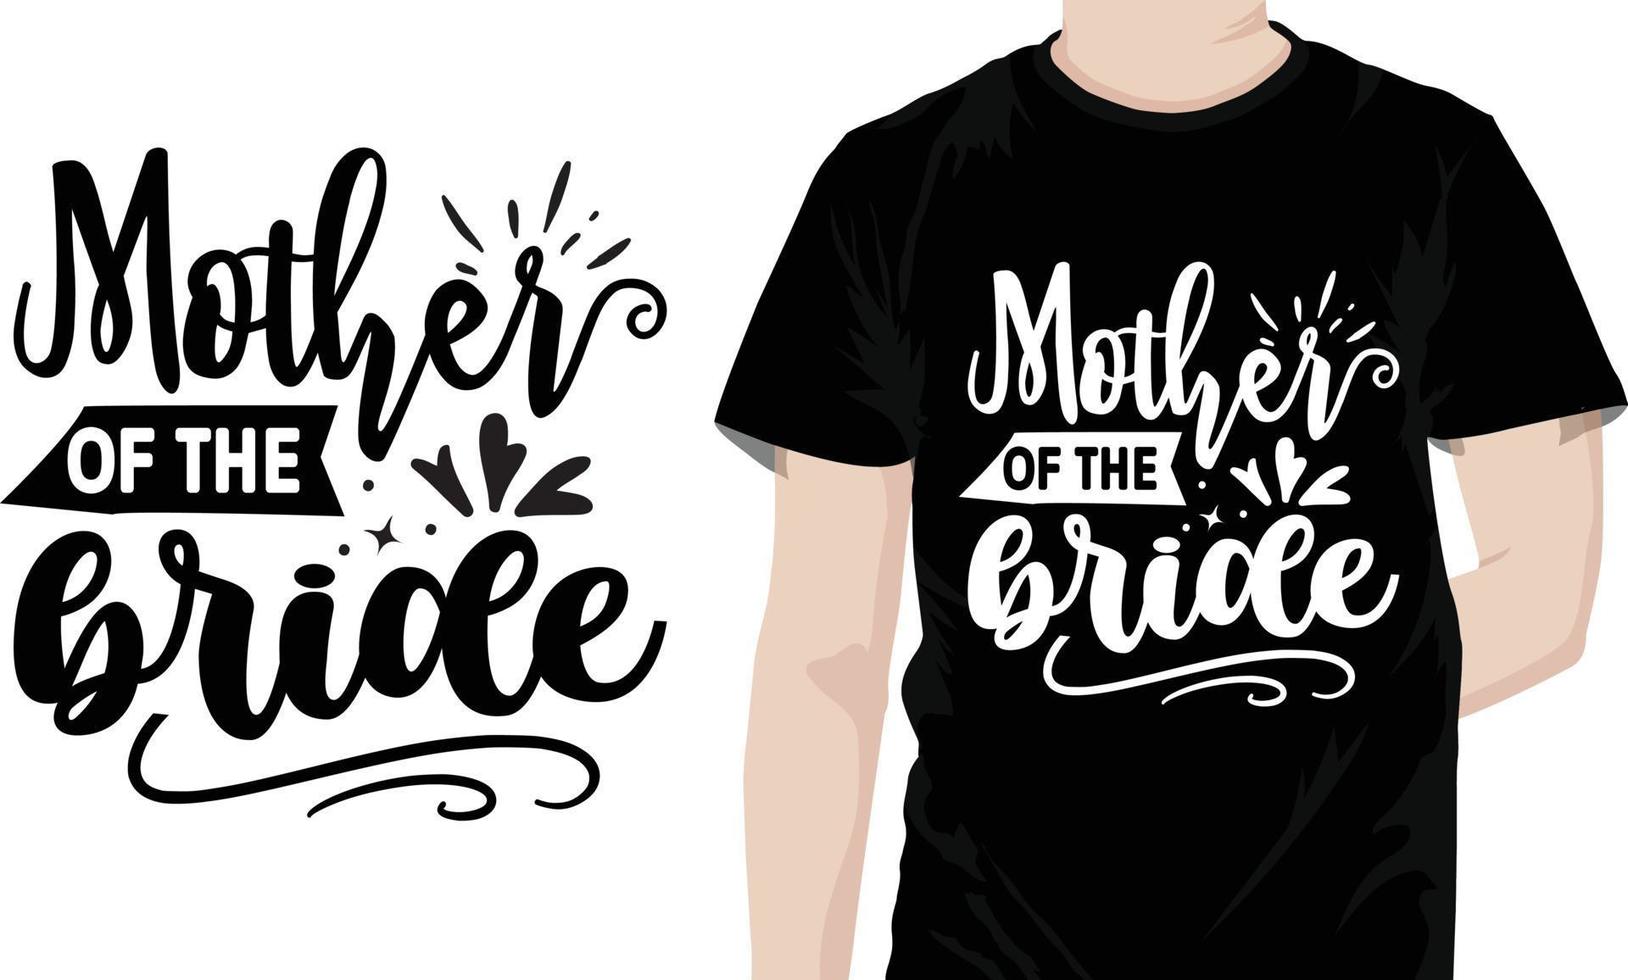 Mother of the bride Wedding Quotes Design vector